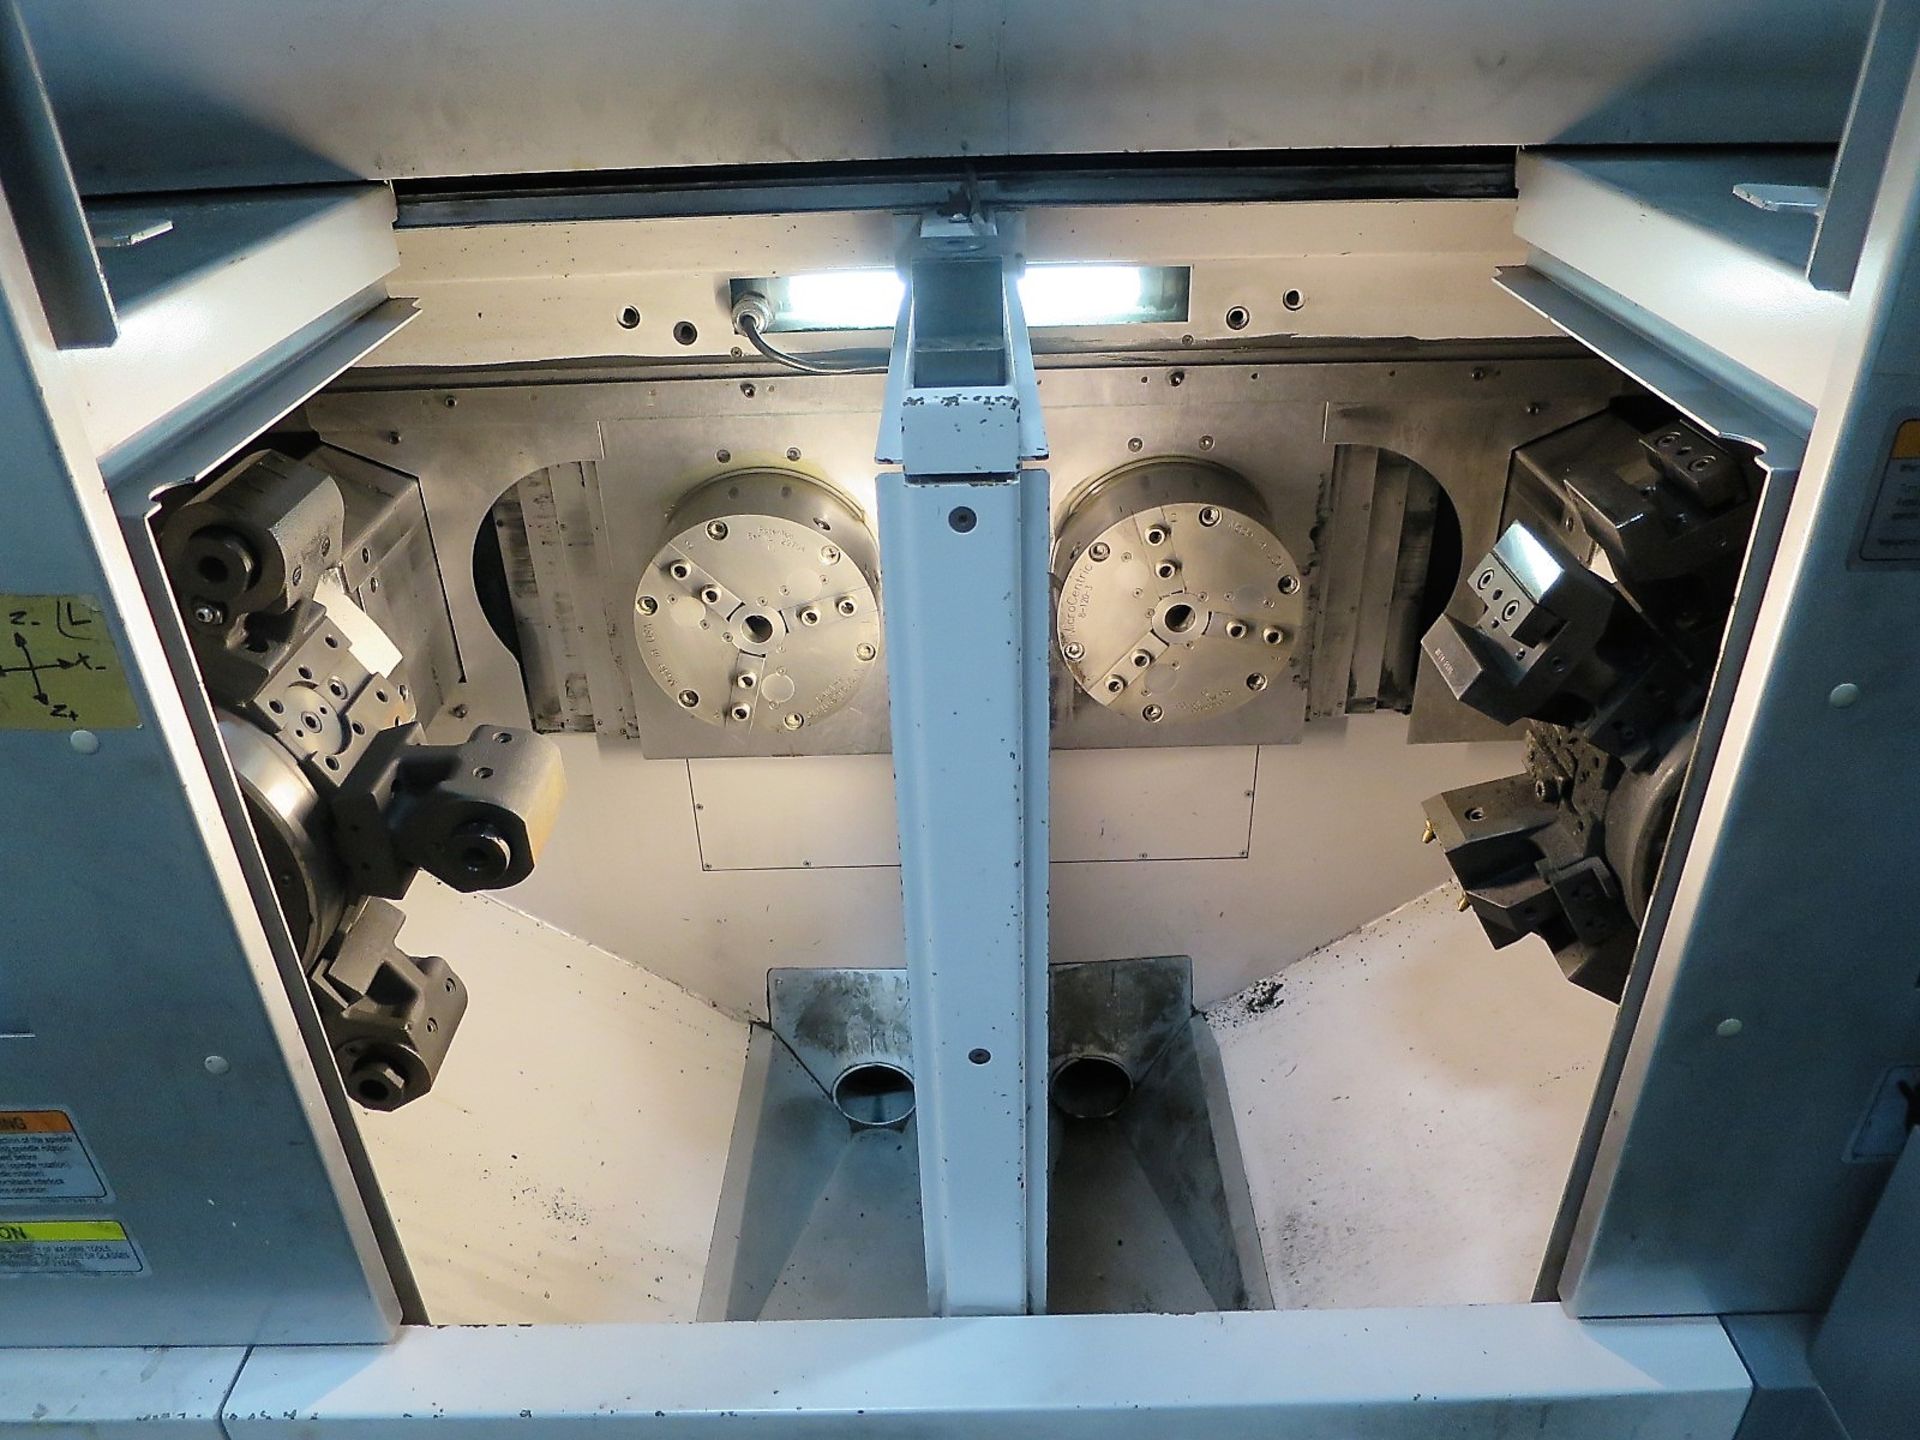 Okuma 2SP-150HM Twin Spindle 3-Axis Turning Center w/Live Milling, S/N 2SP-150HM, New 2011 - Image 3 of 12